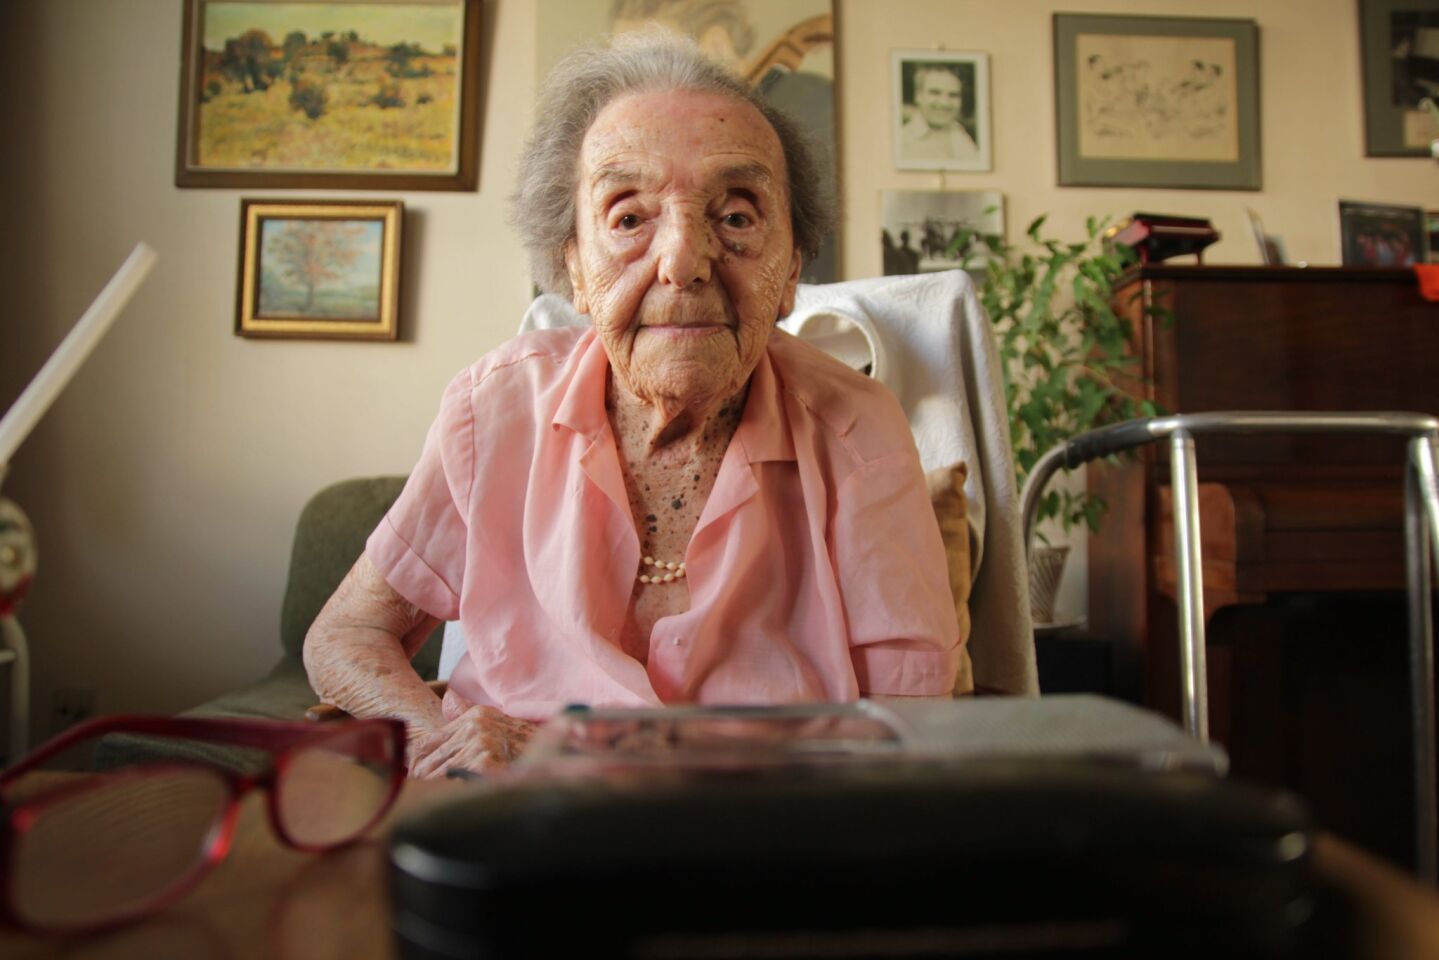 Widely thought to be the oldest survivor of the Holocaust, Herz-Sommer played piano while imprisoned in the Theresienstadt concentration camp. She is the subject of "The Lady in Number 6," a 38-minute documentary. She was 110.